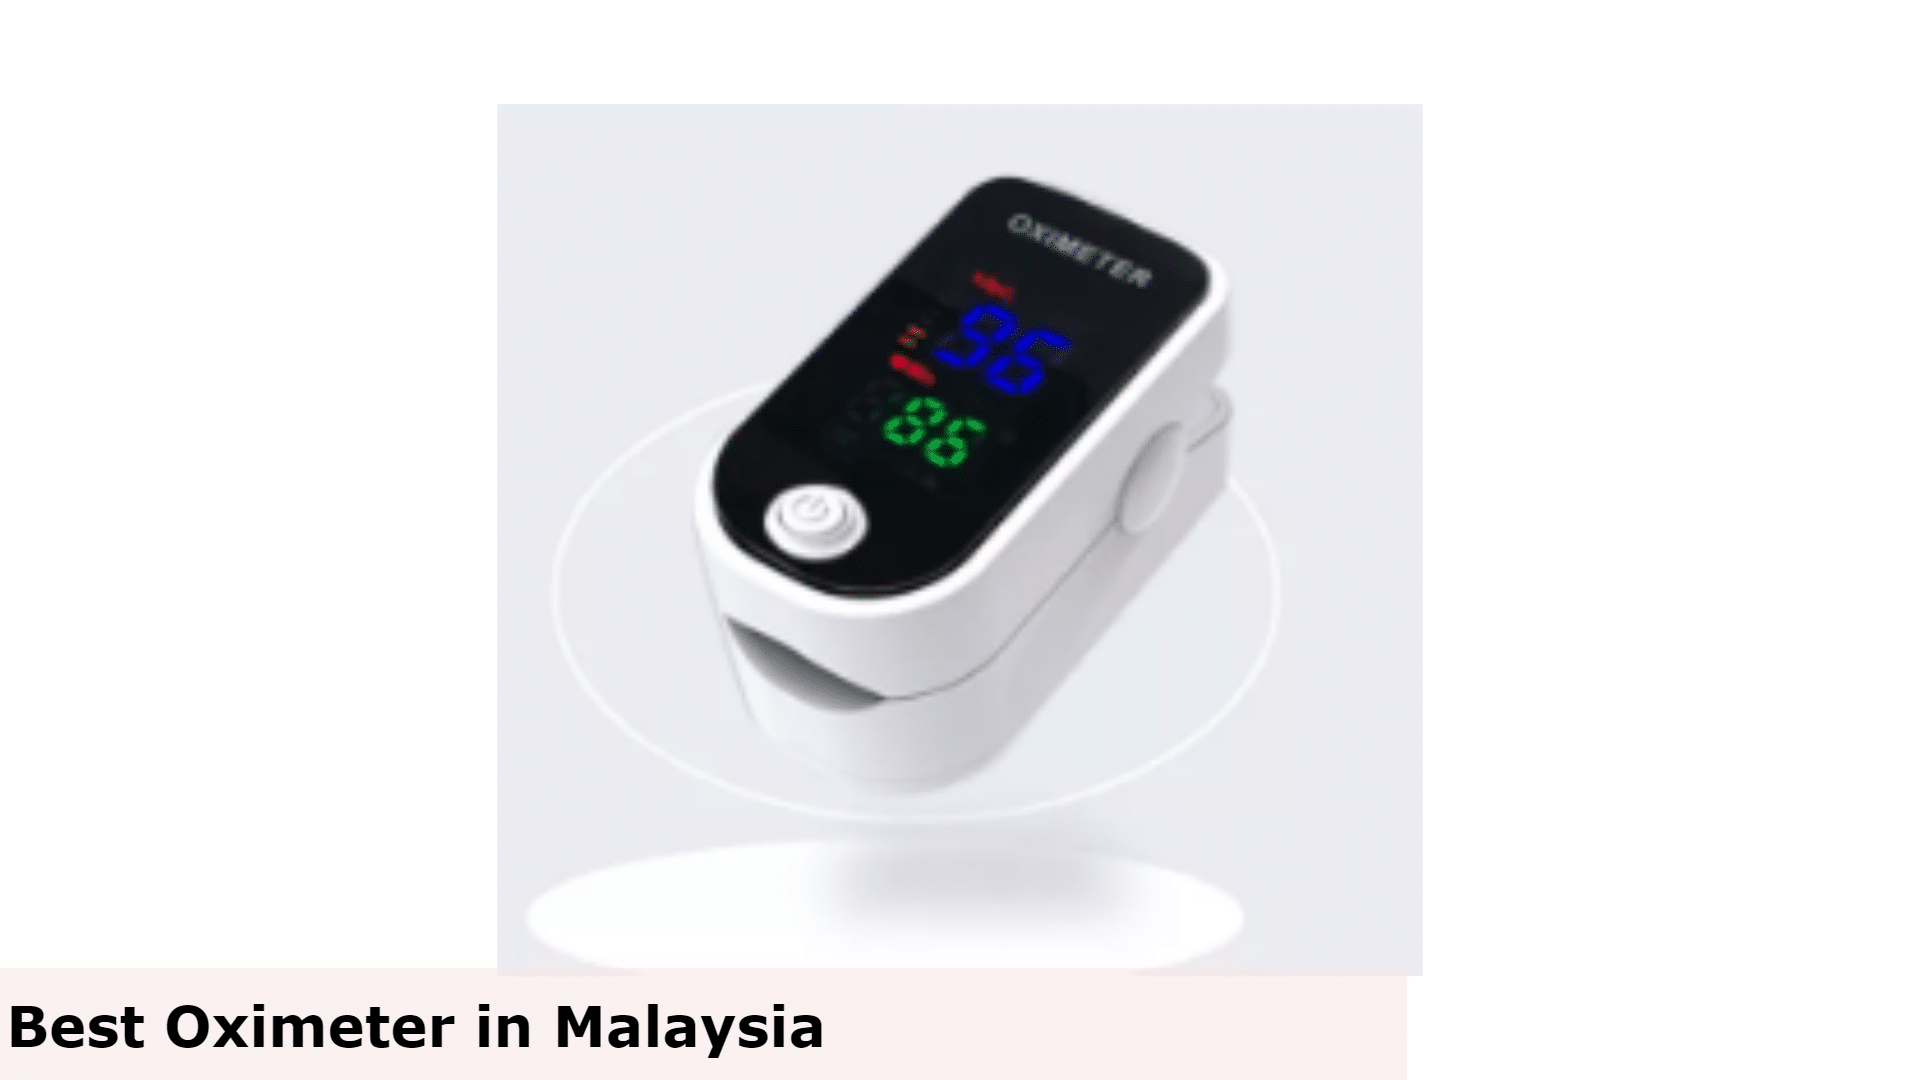 EYD Finger Pulse Oximeter - Best Oximeter in Malaysia, Oximeter Malaysia, How to use an Oximeter, oximeter reading Malaysia, oximeter normal range, pulse oximeter, oximeter price Malaysia, oximeter use, 
oximeter covid, oximeter amazon, Can an Oximeter Help Detect COVID-19 at Home, Blood oxygen levels Oximeter Malaysia,